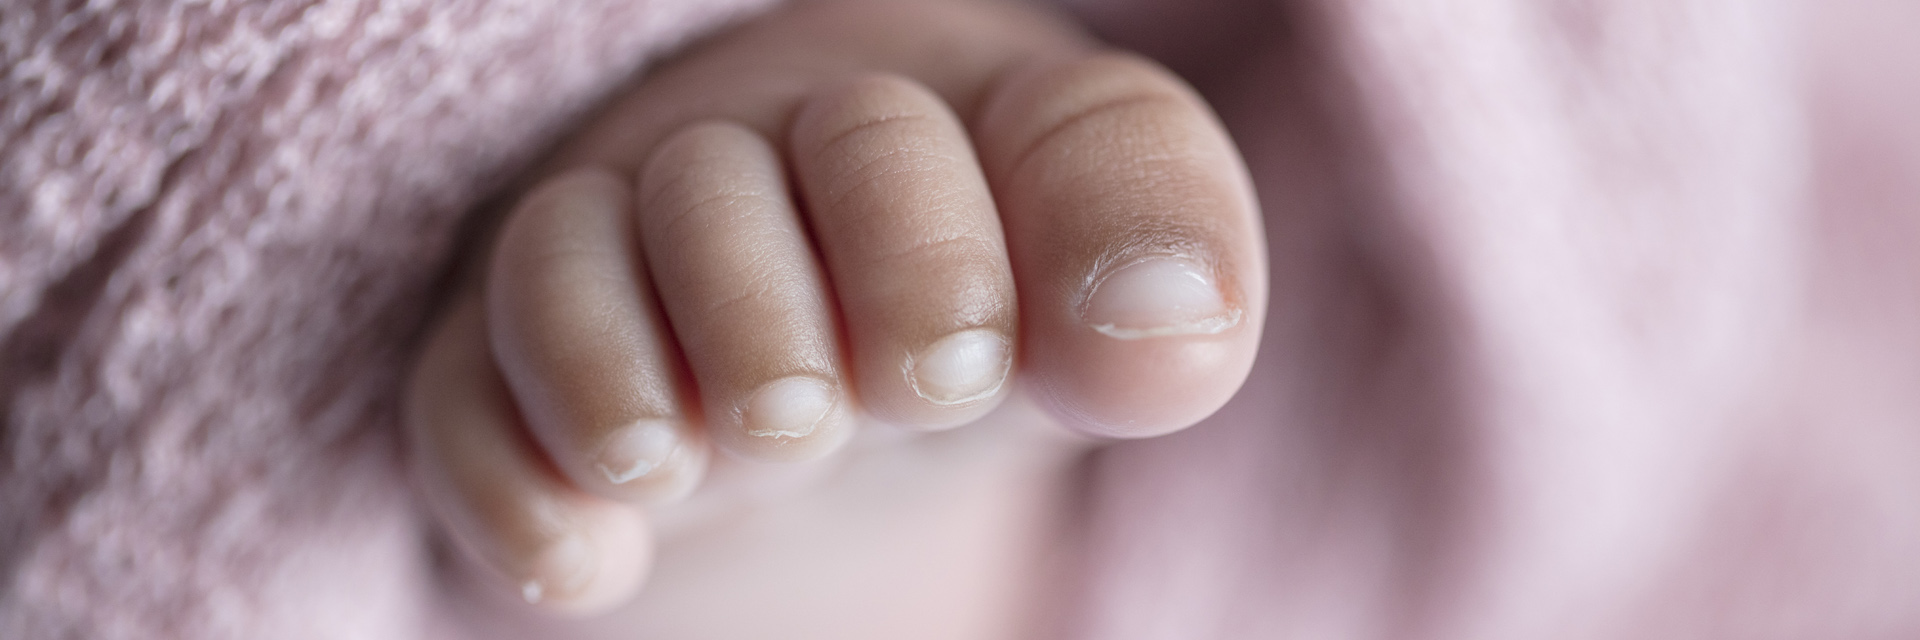 Picture of a baby's foot